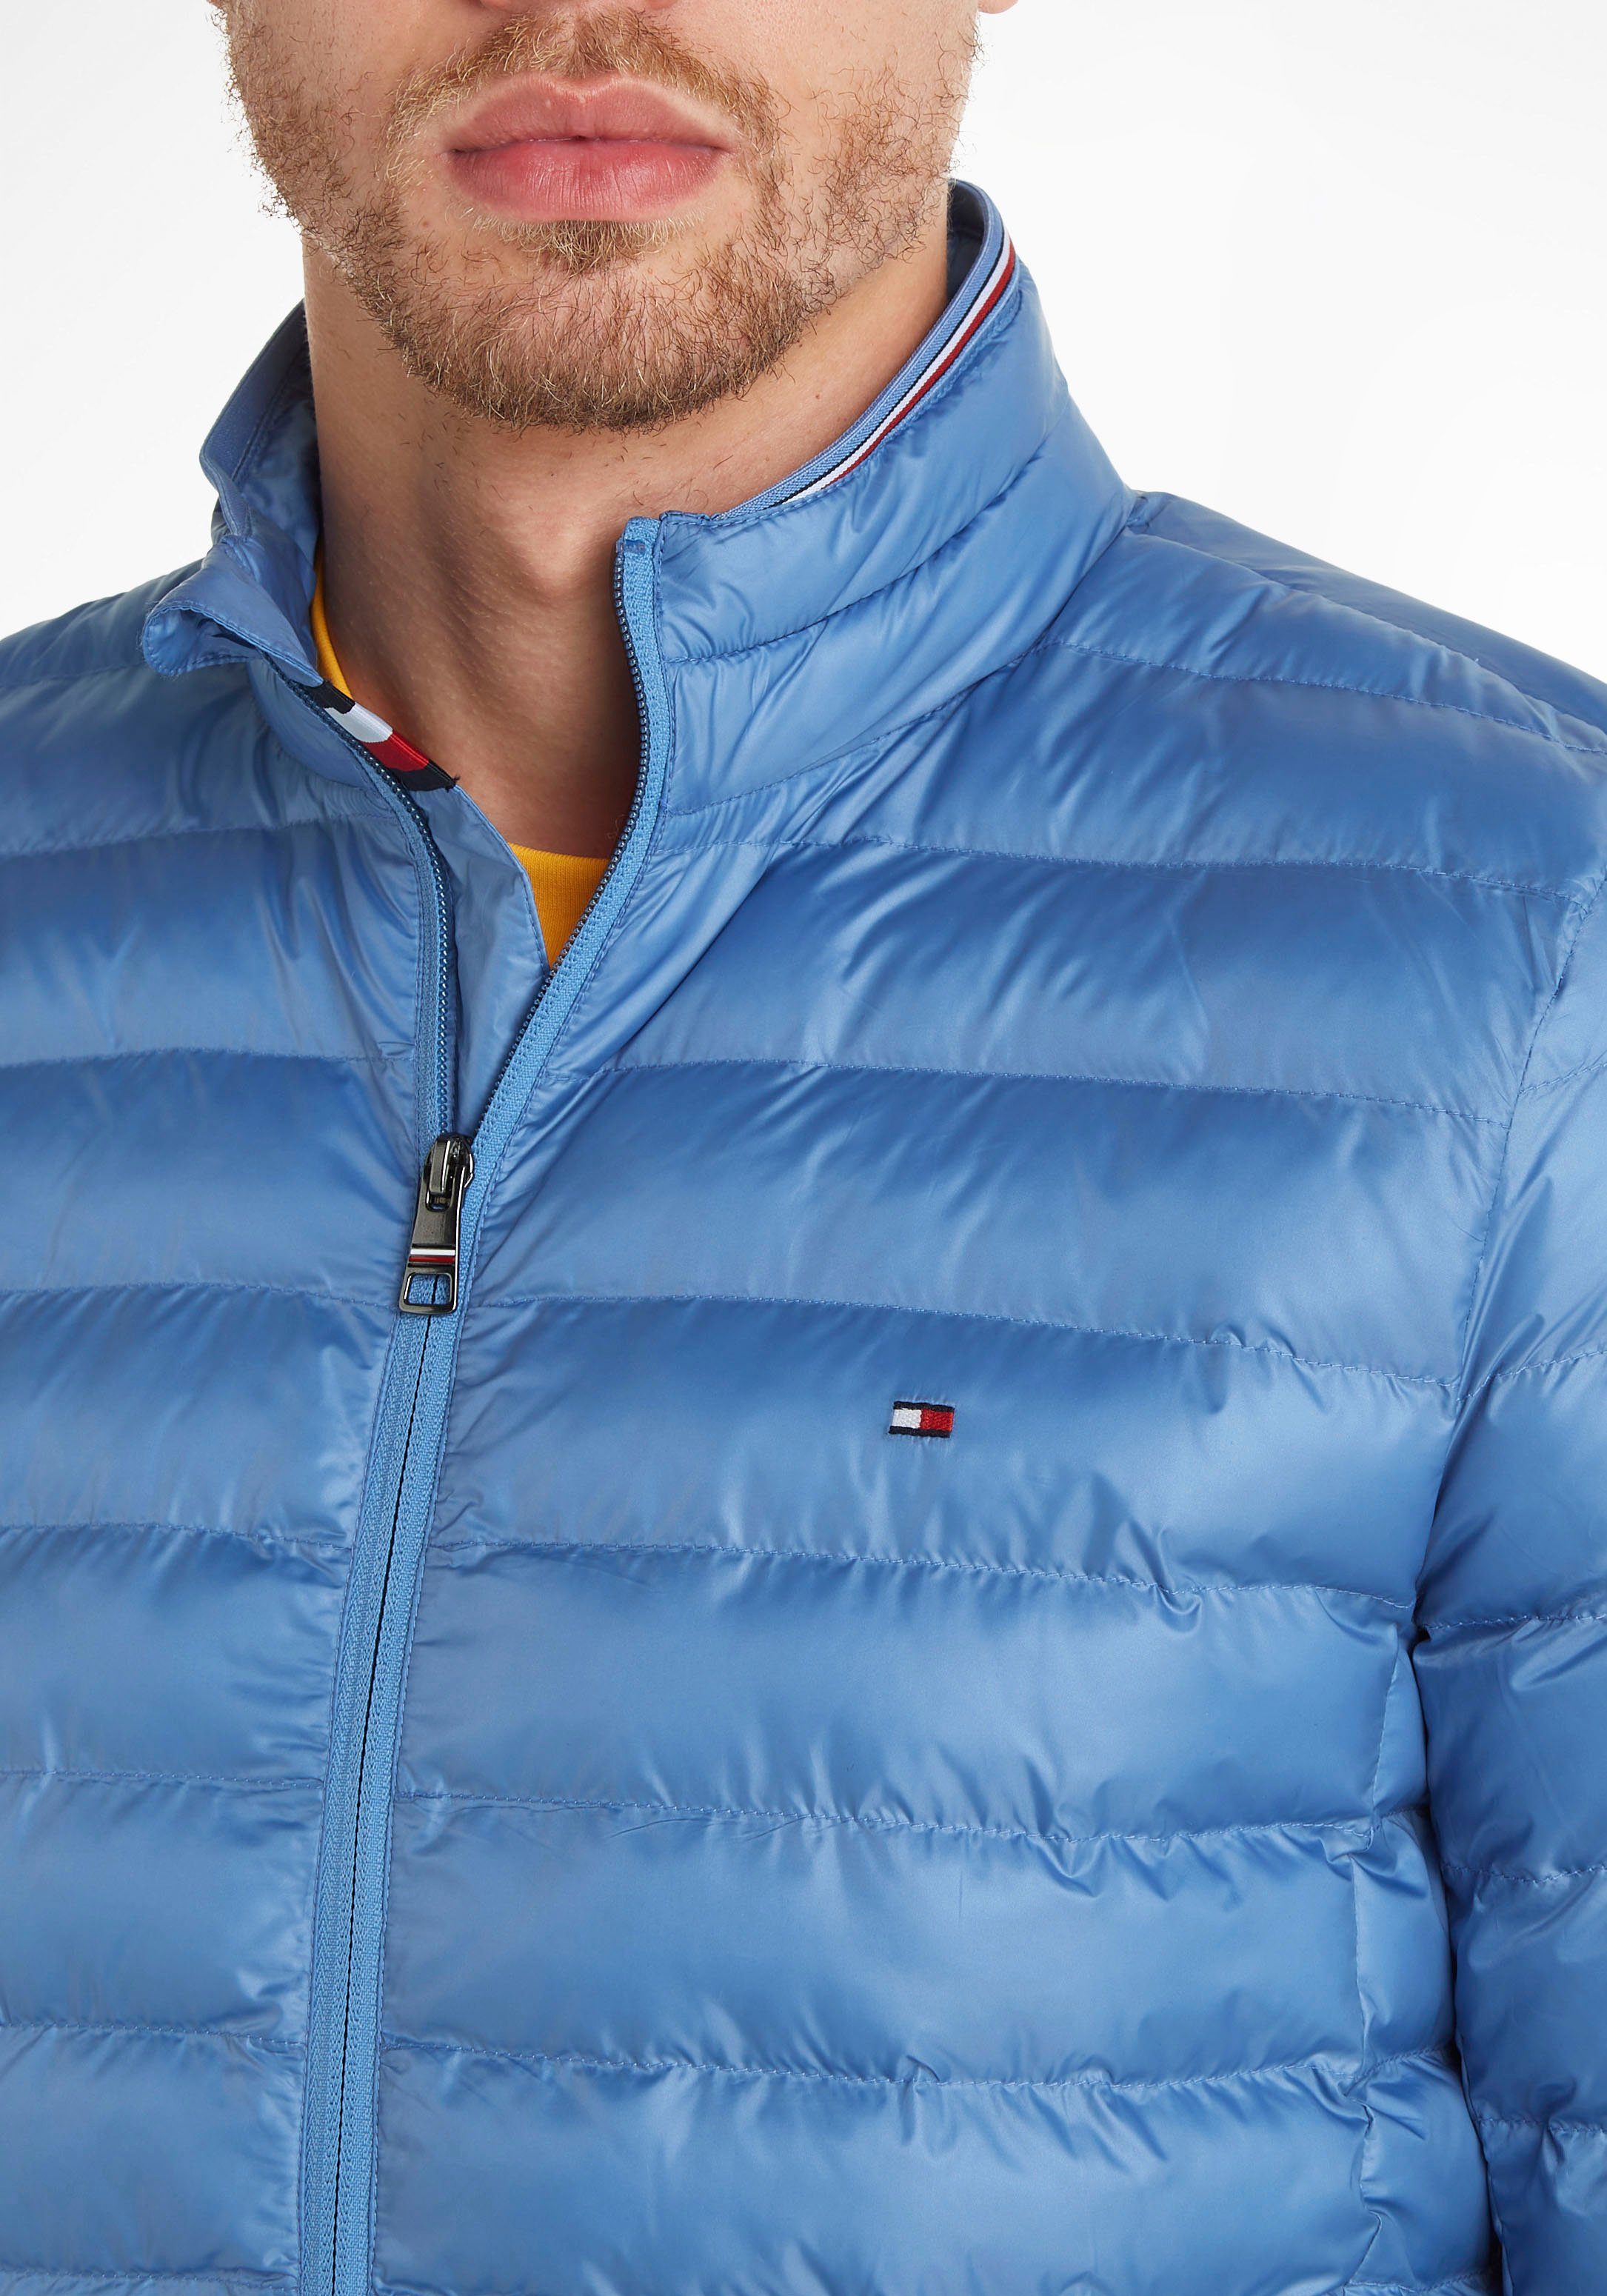 JACKET Hilfiger RECYCLED Tommy Hilfiger PACKABLE mit Steppjacke SkyCloud Logostickerei Tommy